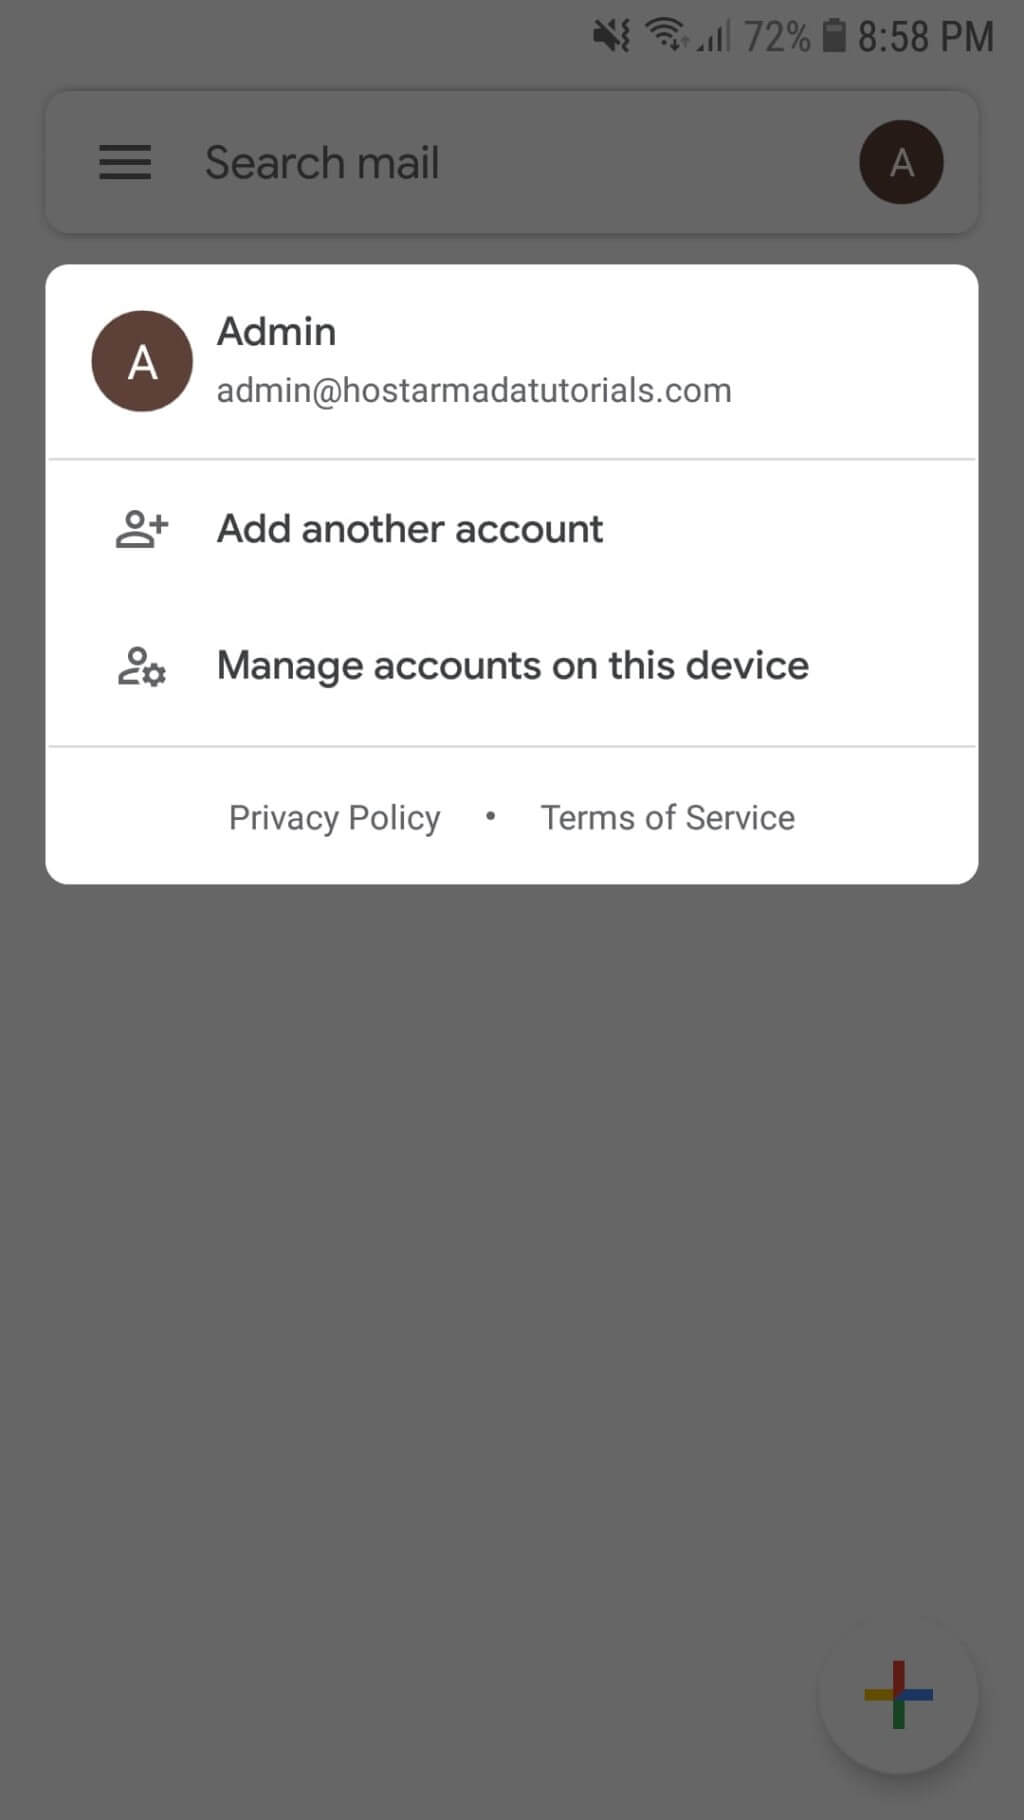 Manage accounts on this device option